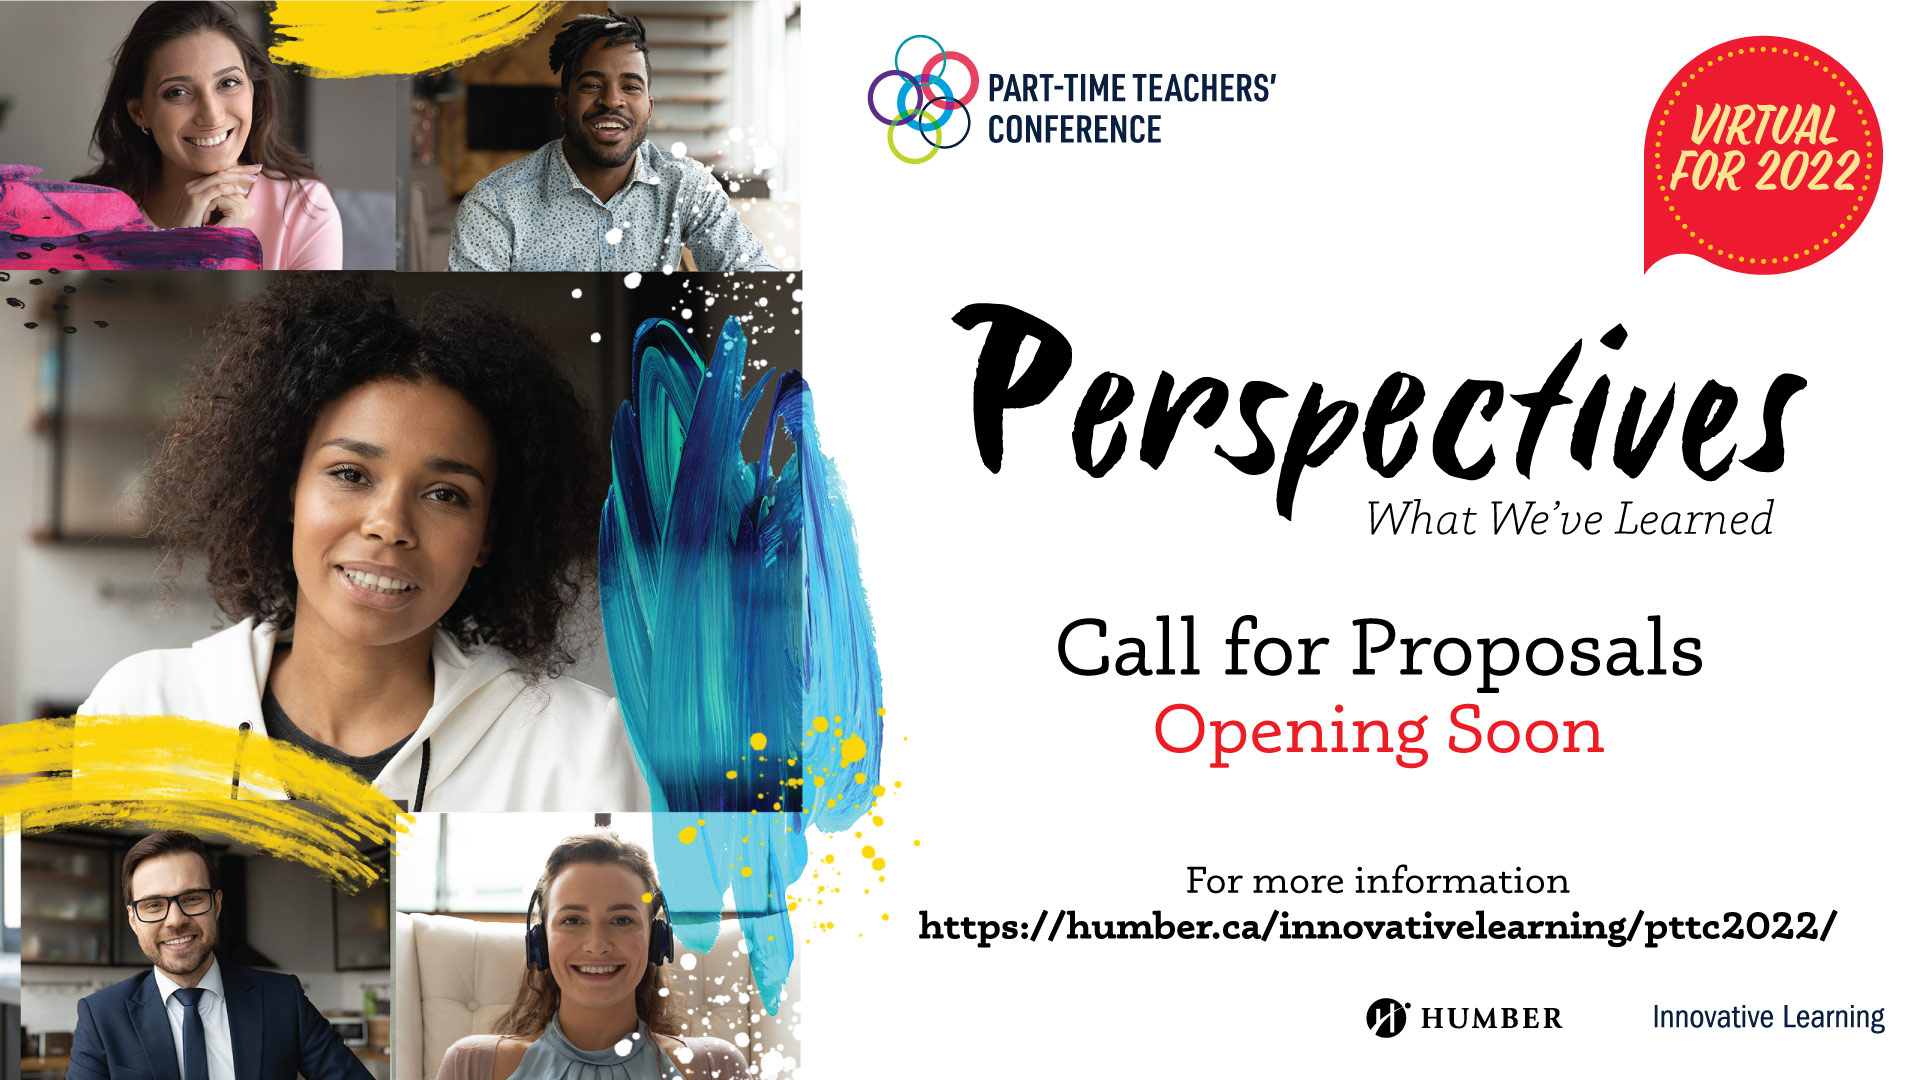 Part-Time Teachers Conference (PTTC): Call for Proposals Opens Soon